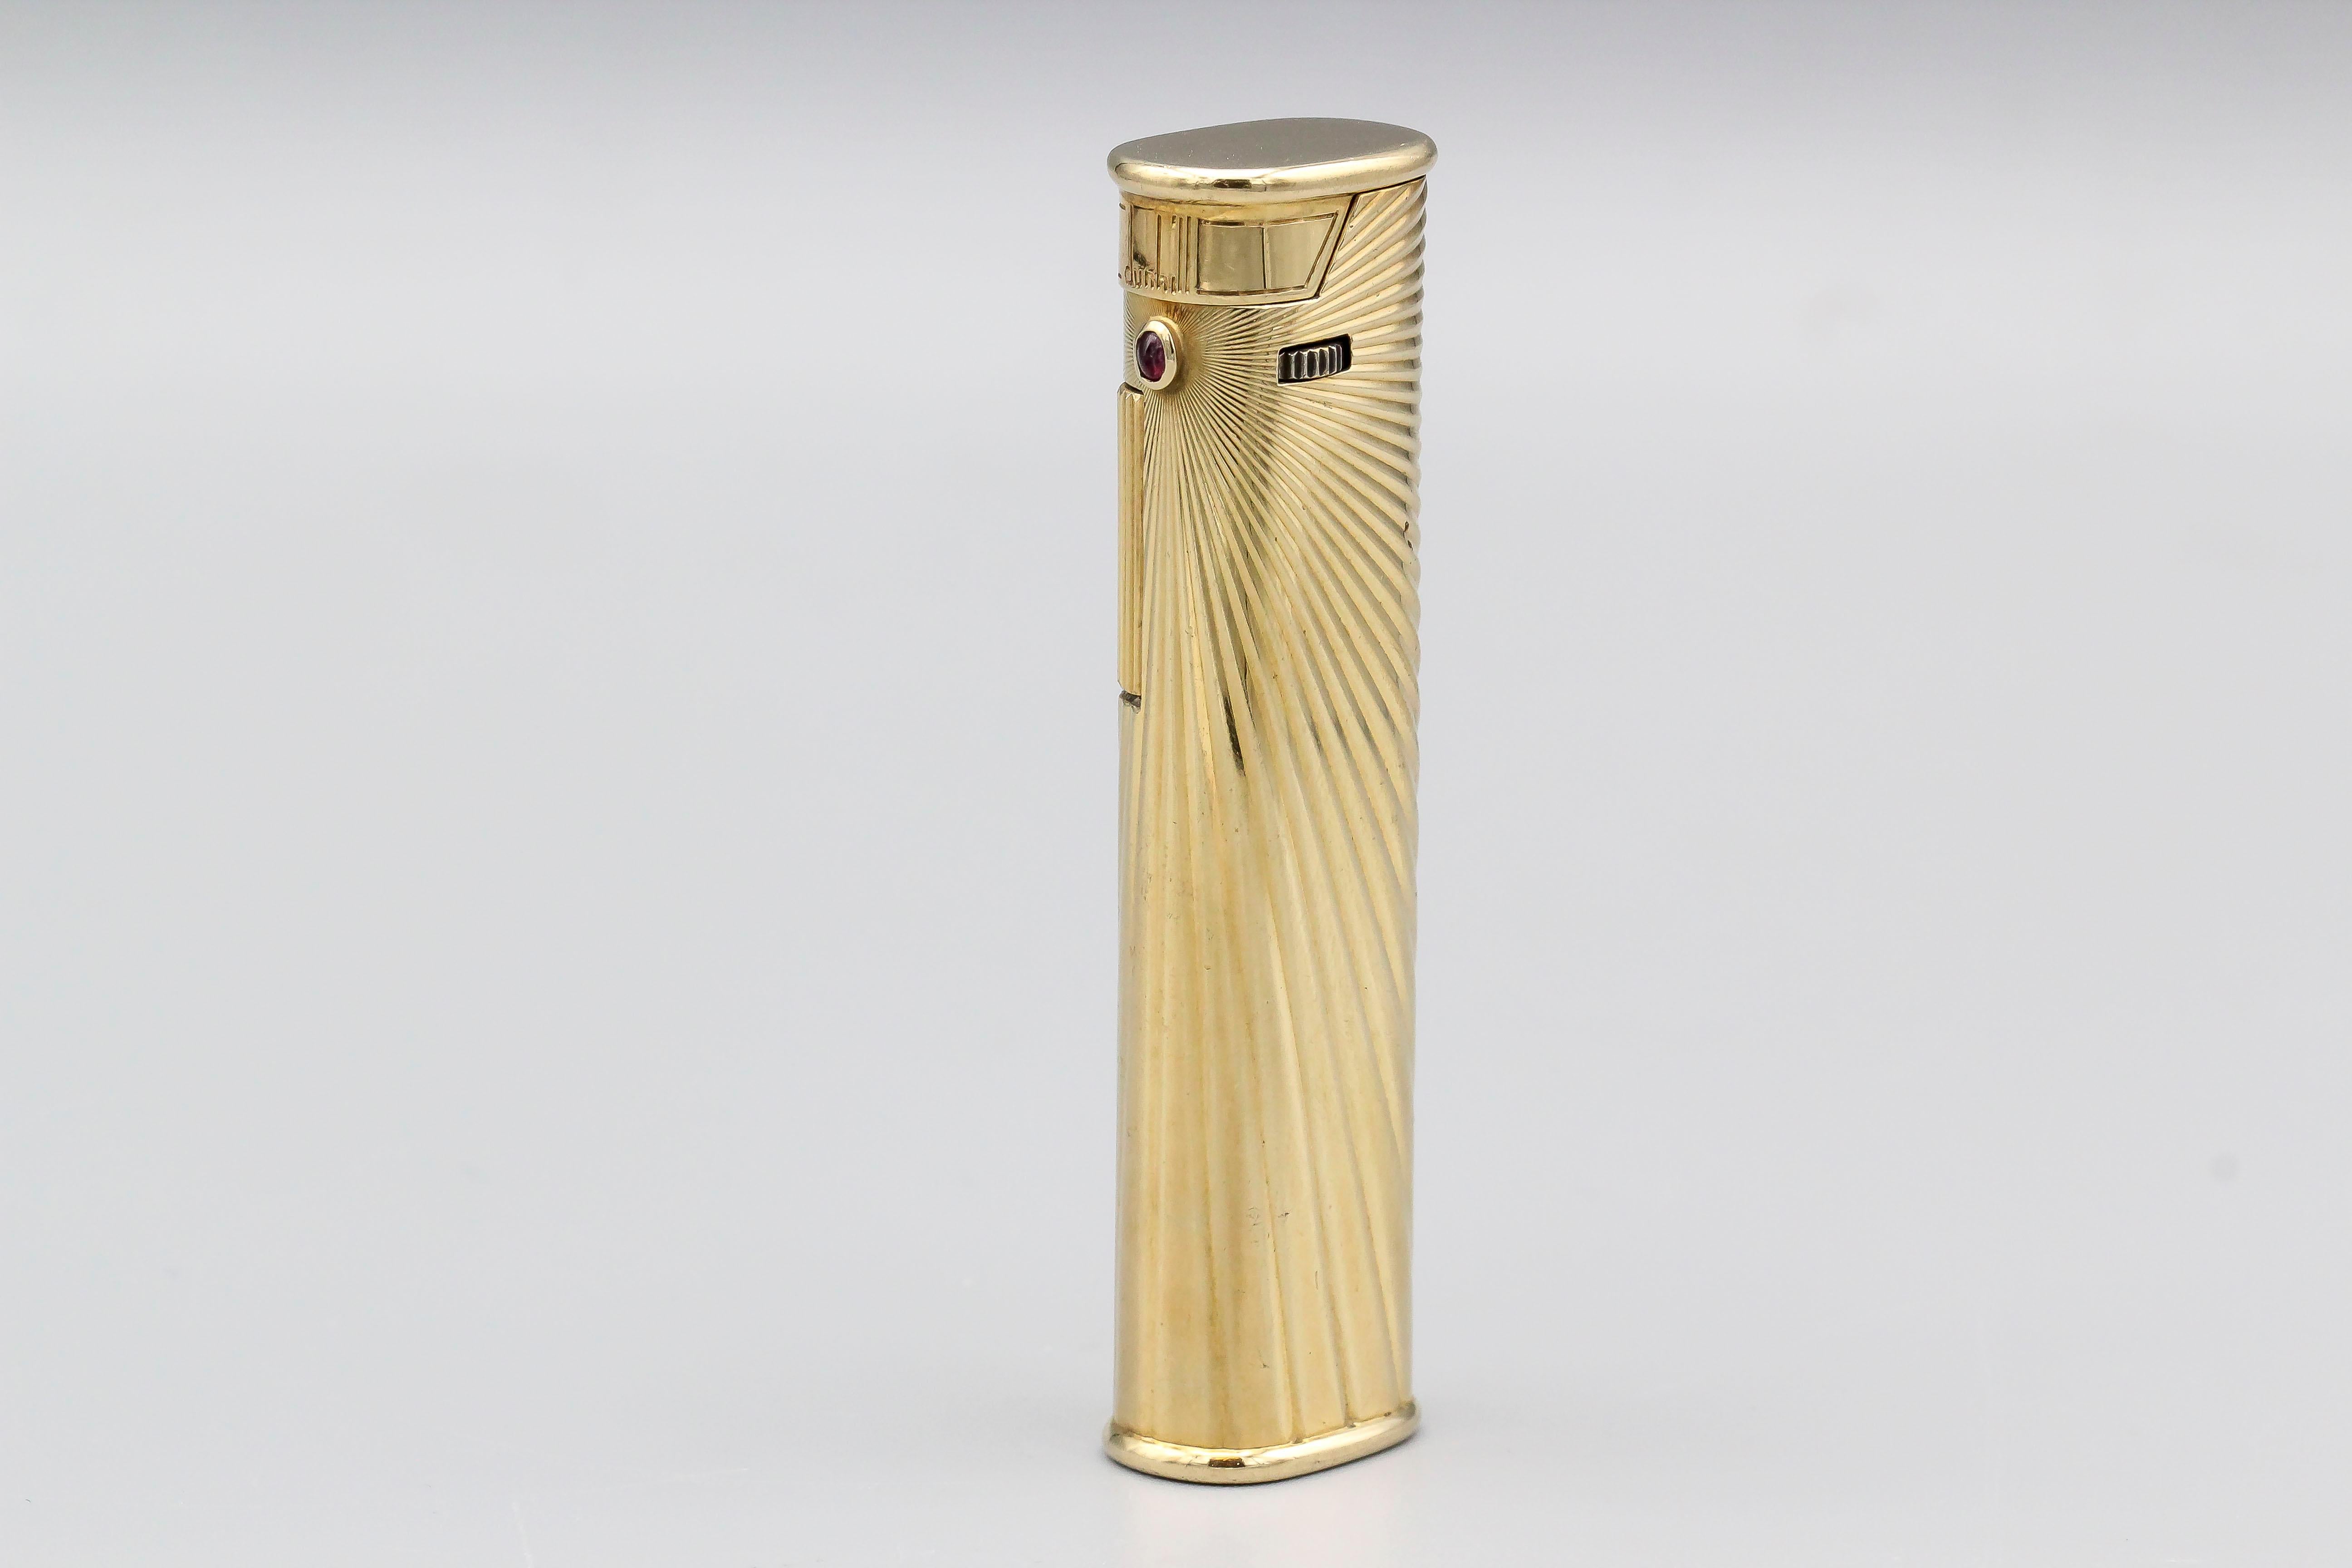 Ignite Luxury: A Bulgari Dunhill Ruby 18 Karat Gold Lighter (Circa 1970s)

This isn't just a lighter; it's a captivating time capsule from the golden age of design. This circa 1970s Bulgari Dunhill Ruby 18 Karat Gold Lighter is a rare and exquisite